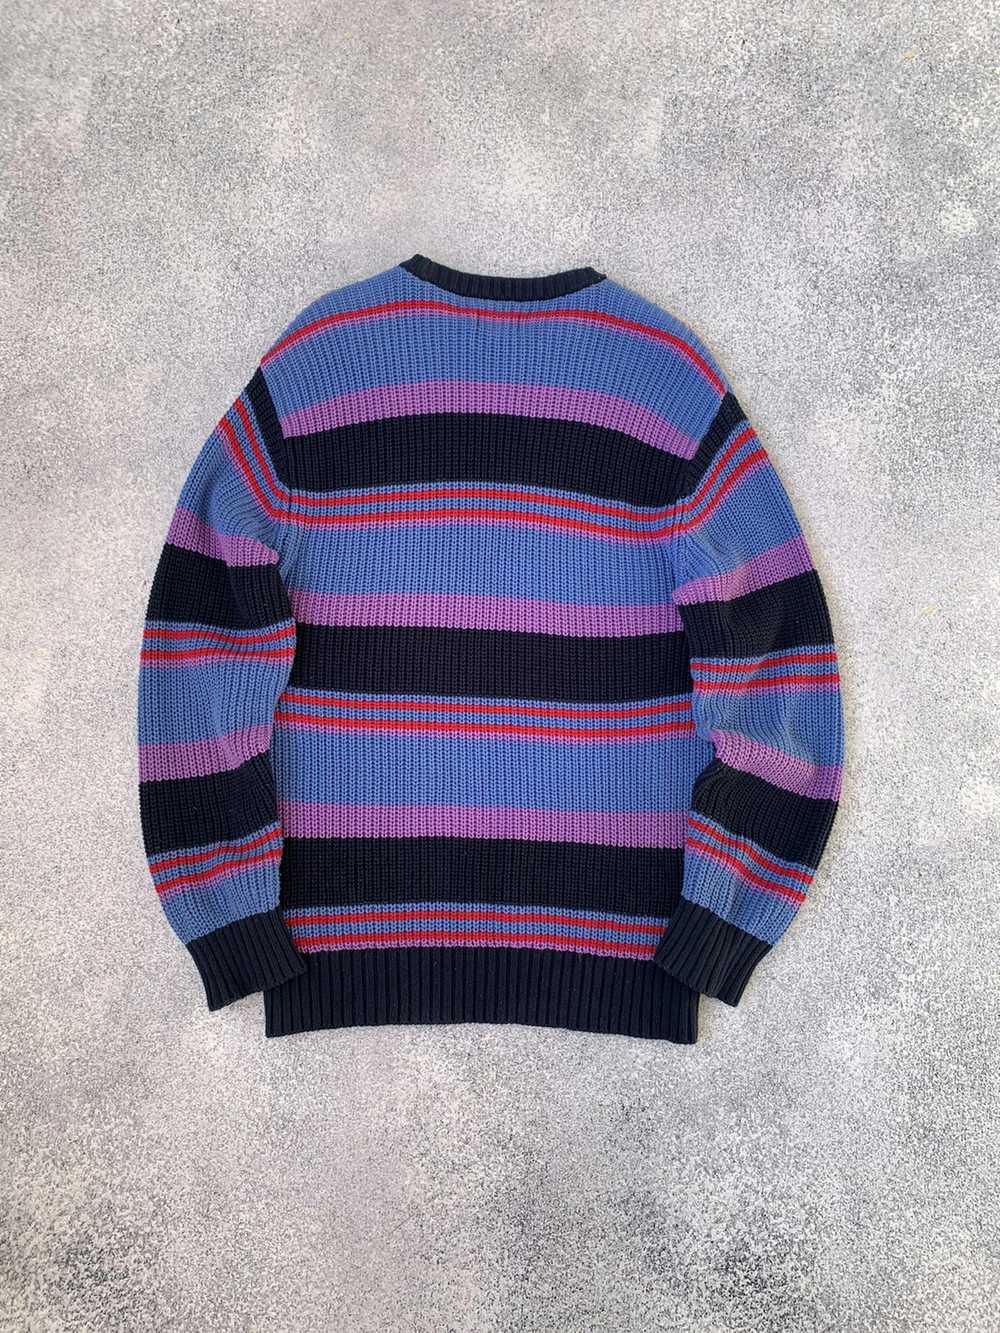 Coloured Cable Knit Sweater × Obey × Vintage Vint… - image 9